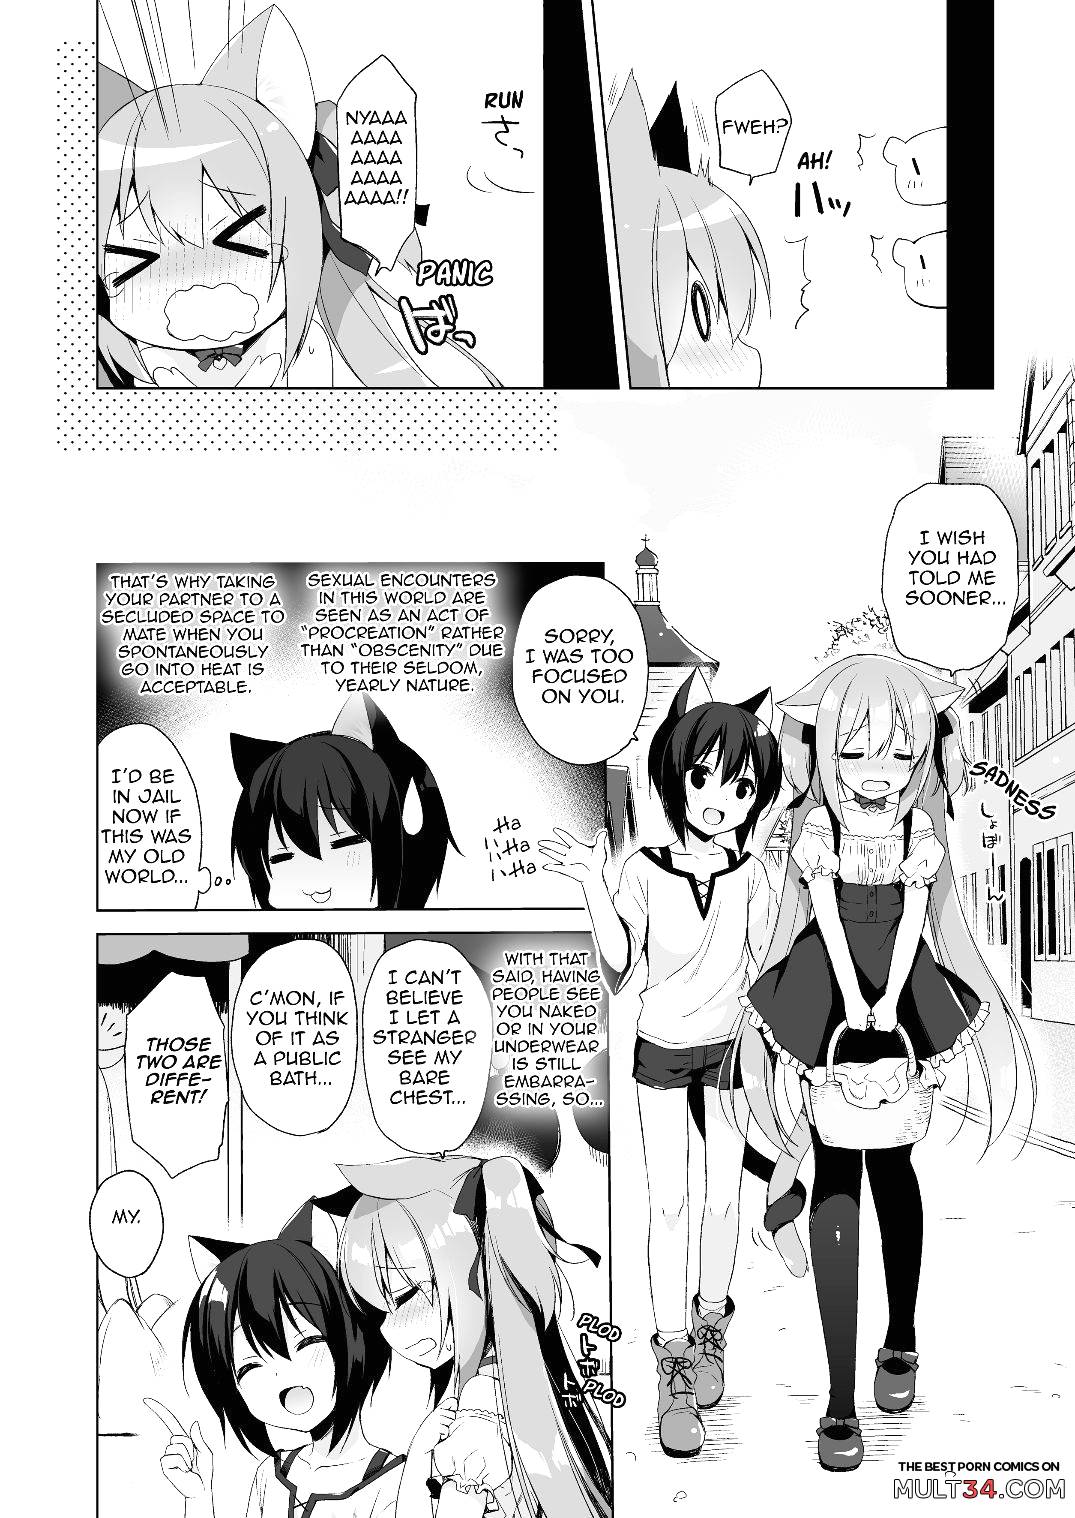 My Ideal Life in Another World 2 page 17